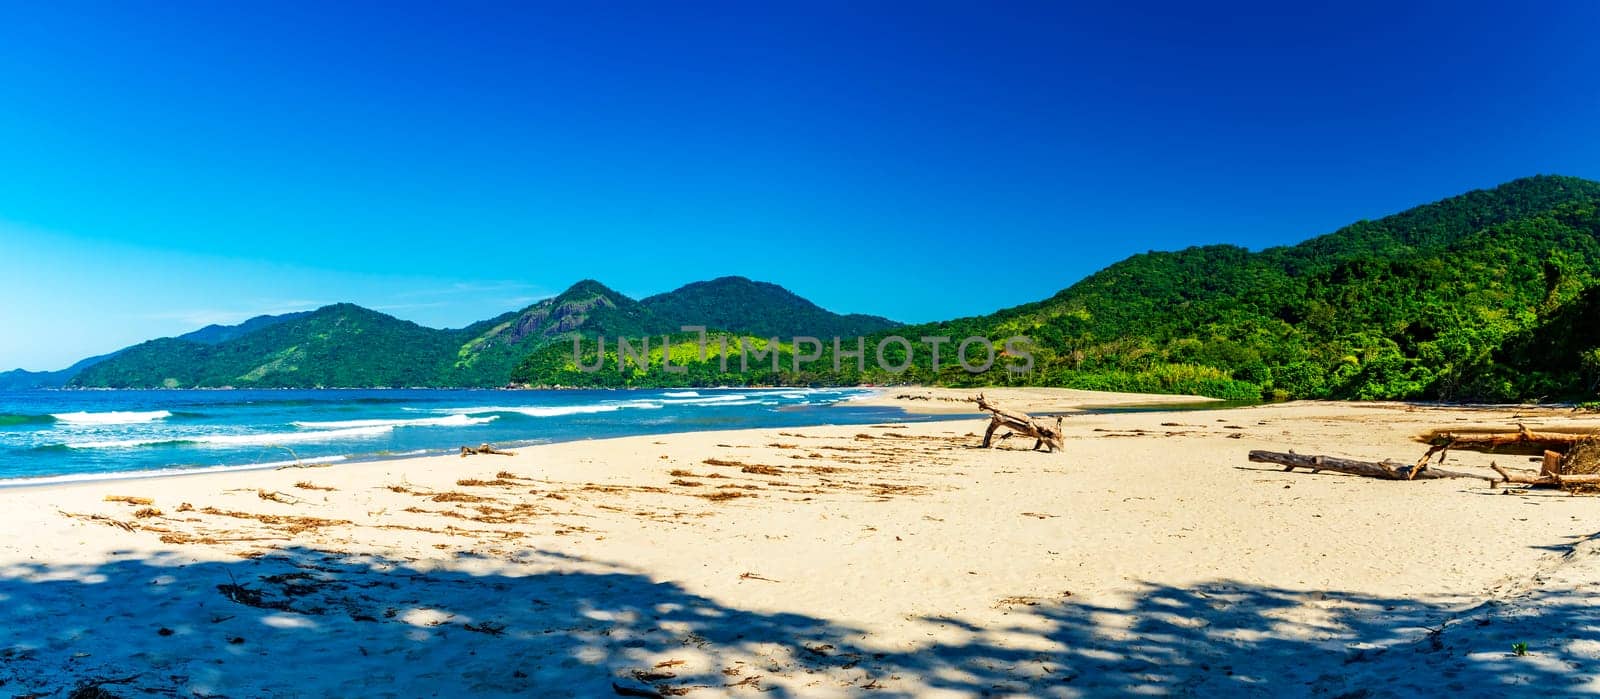 Castelhanos beach between the sea, mountains and forests of the island of Ilhabela on the coast of Sao Paulo